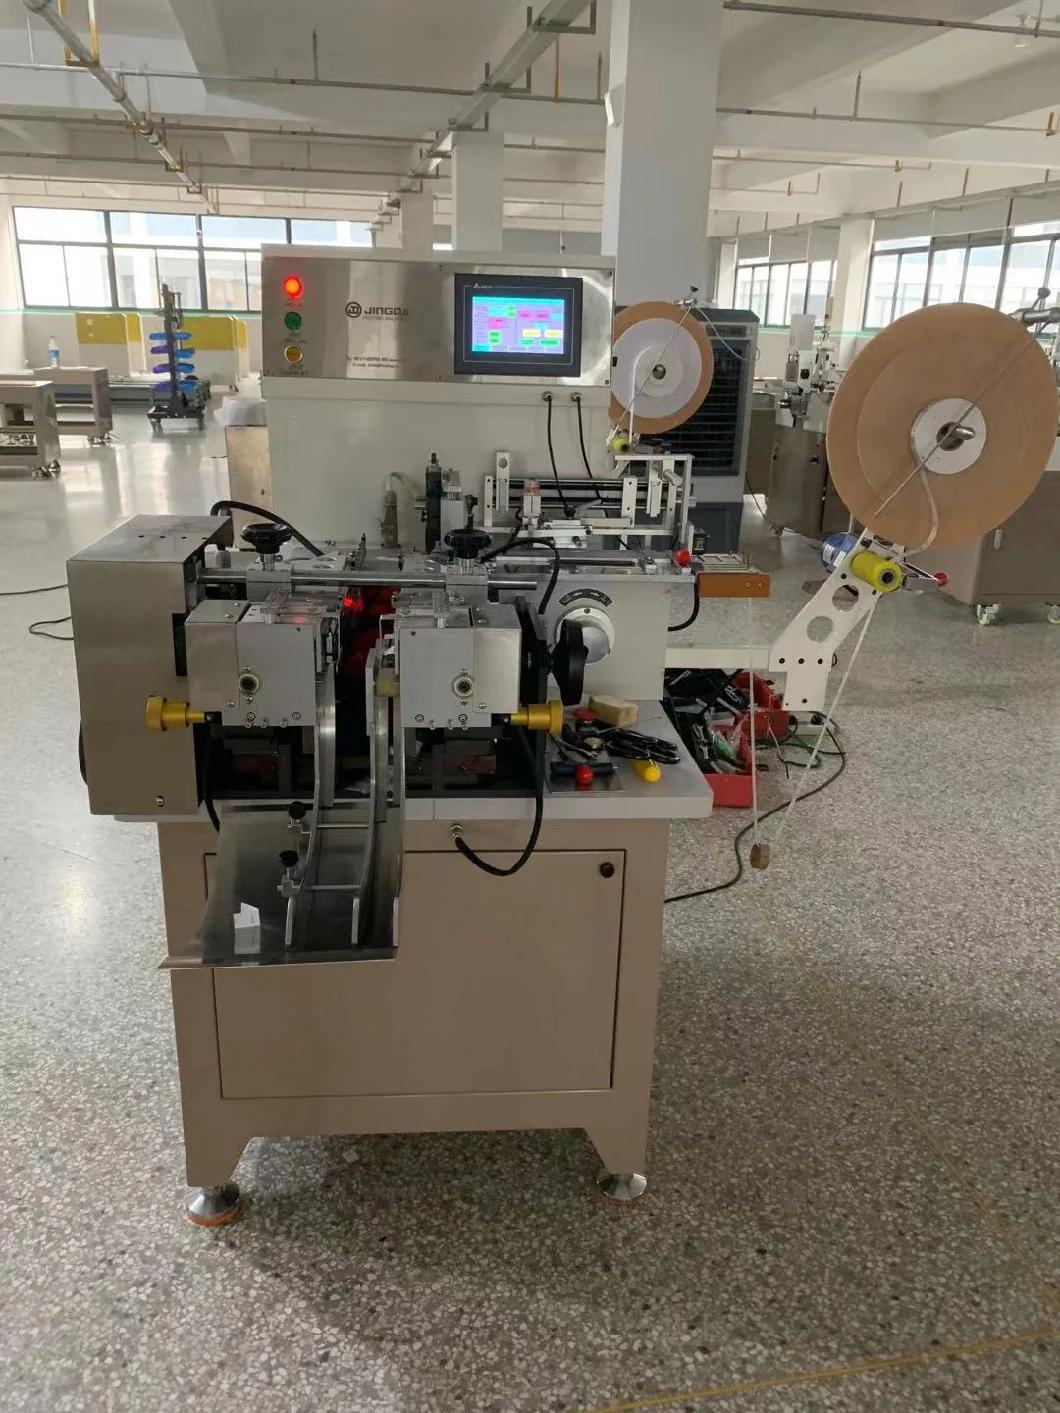 Multifunction Woven Label Cutting Machine/ Hot and Cold Printed Garment Fabric Label Cut and Fold Machine for Satin Ribbon, Cotton Tape, Care Label Jz-2817